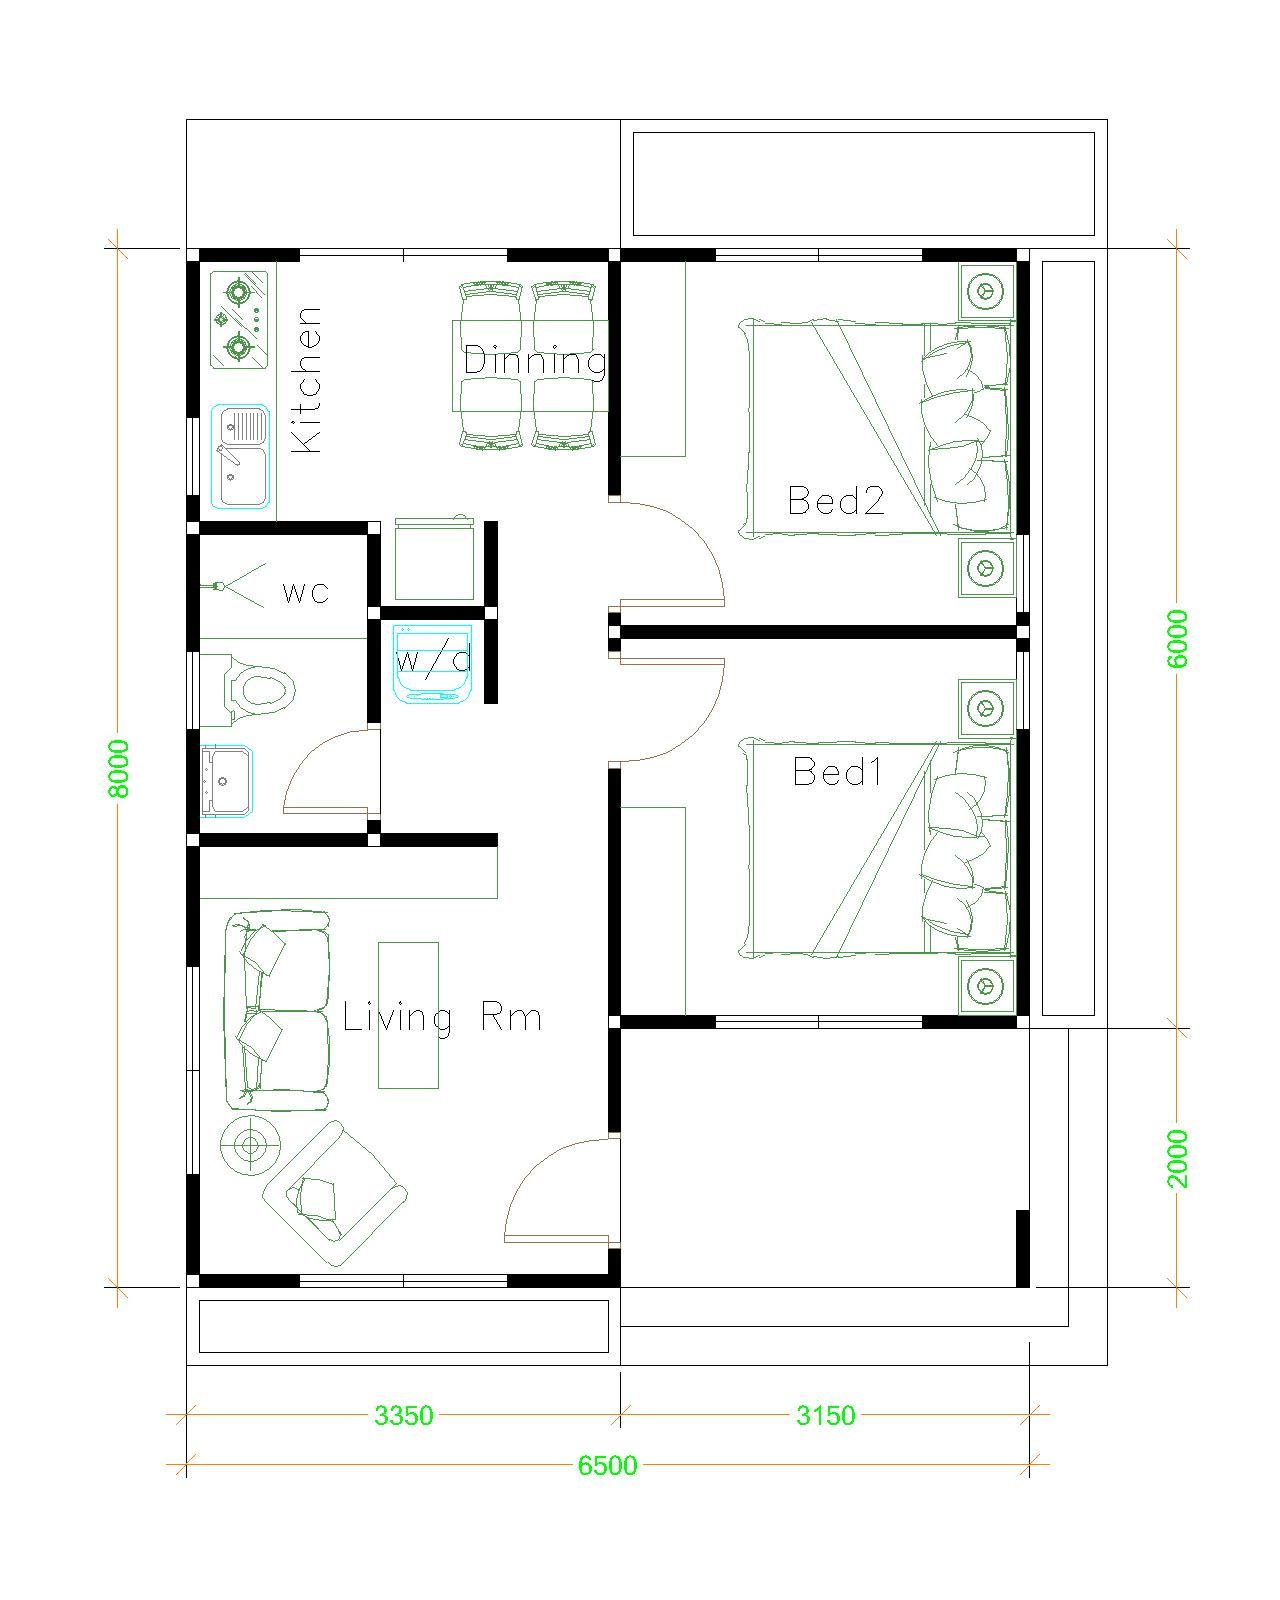 House Design Plans 6.5x8 with 2 Bedrooms Shed Roof floor plan